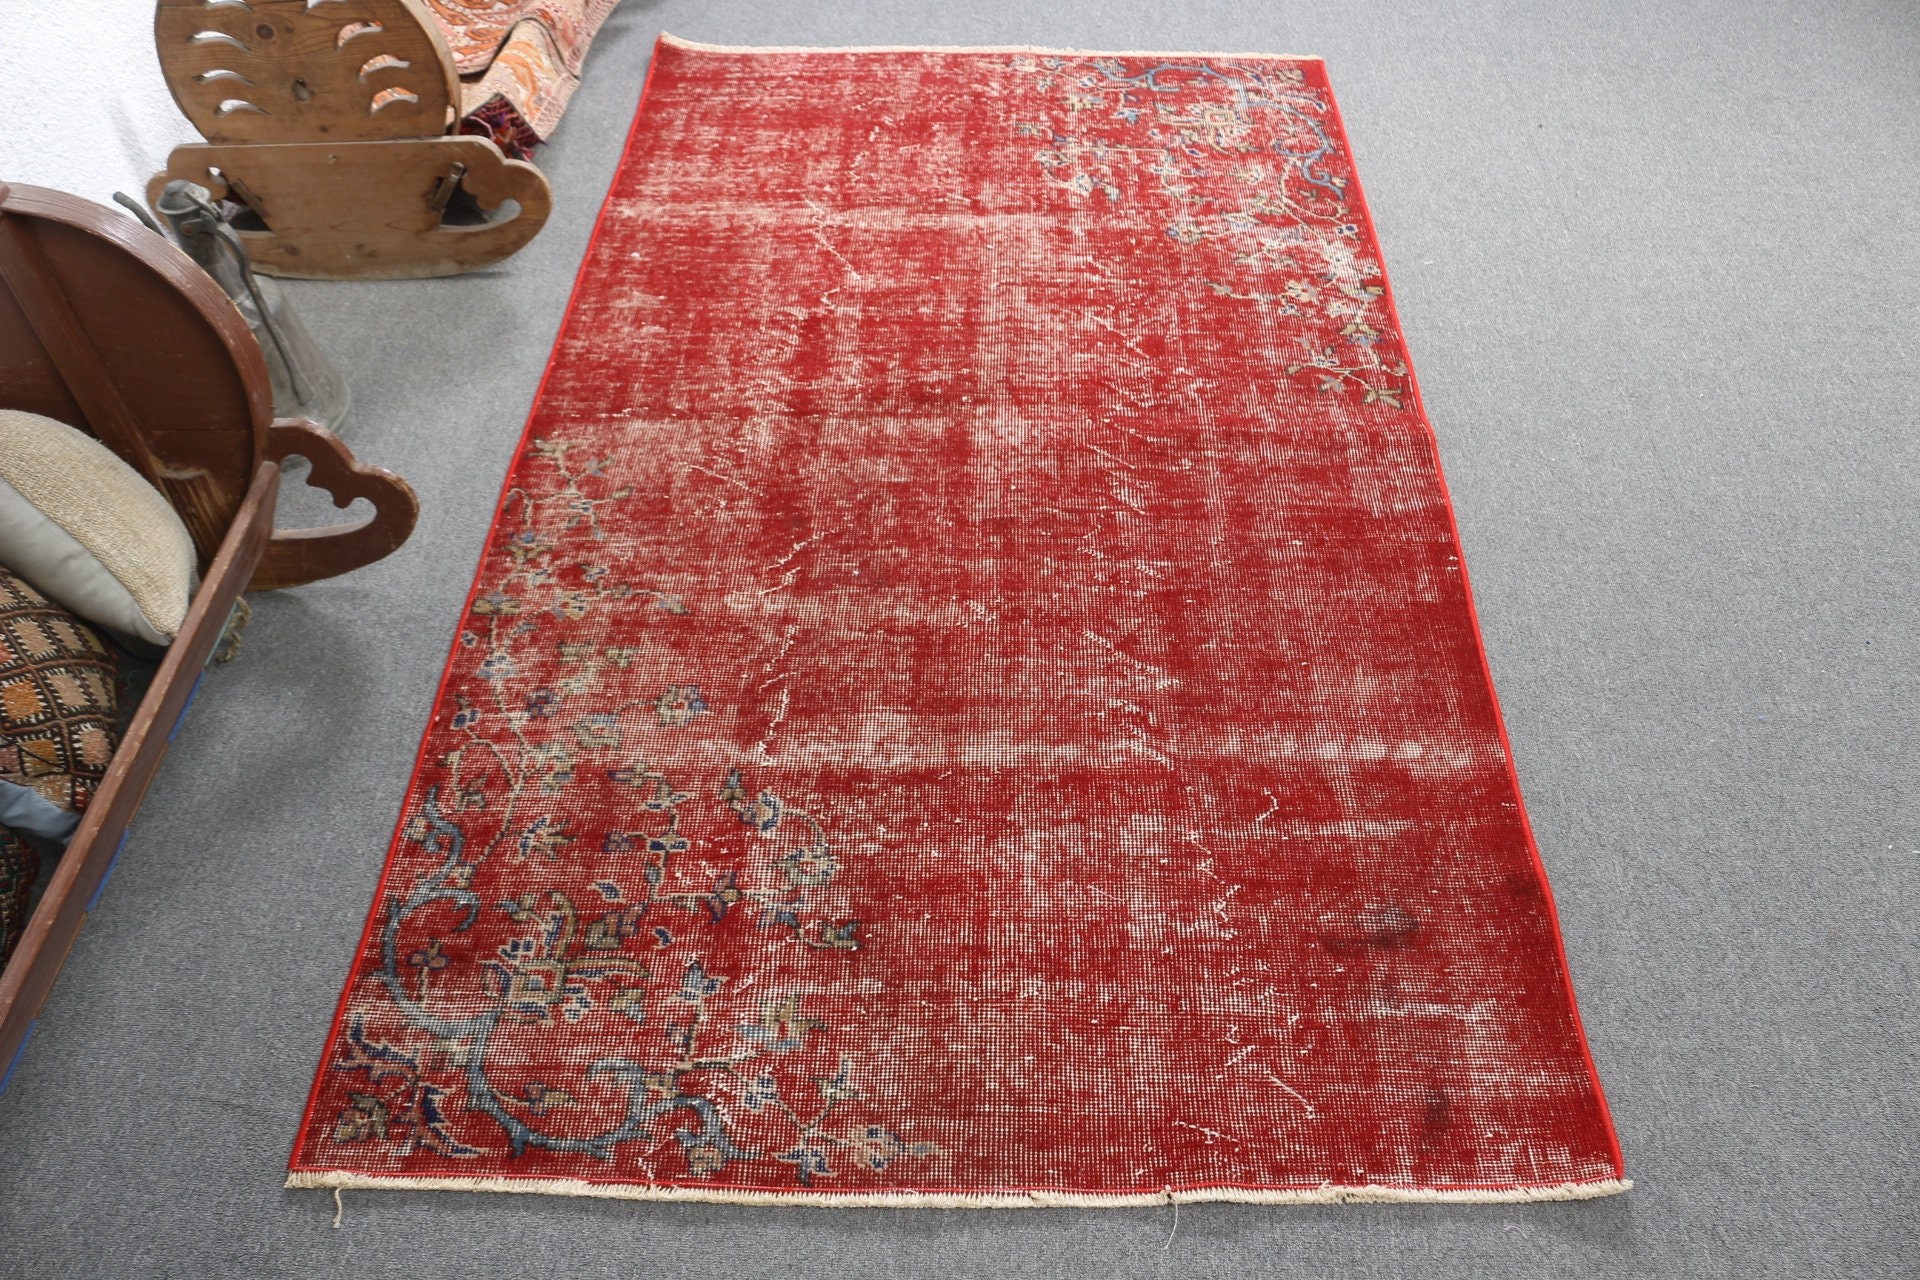 Red Cool Rugs, Vintage Rug, Retro Rug, Home Decor Rug, Pastel Rugs, Turkish Rug, Rugs for Living Room, Bedroom Rugs, 3.8x6.5 ft Area Rug